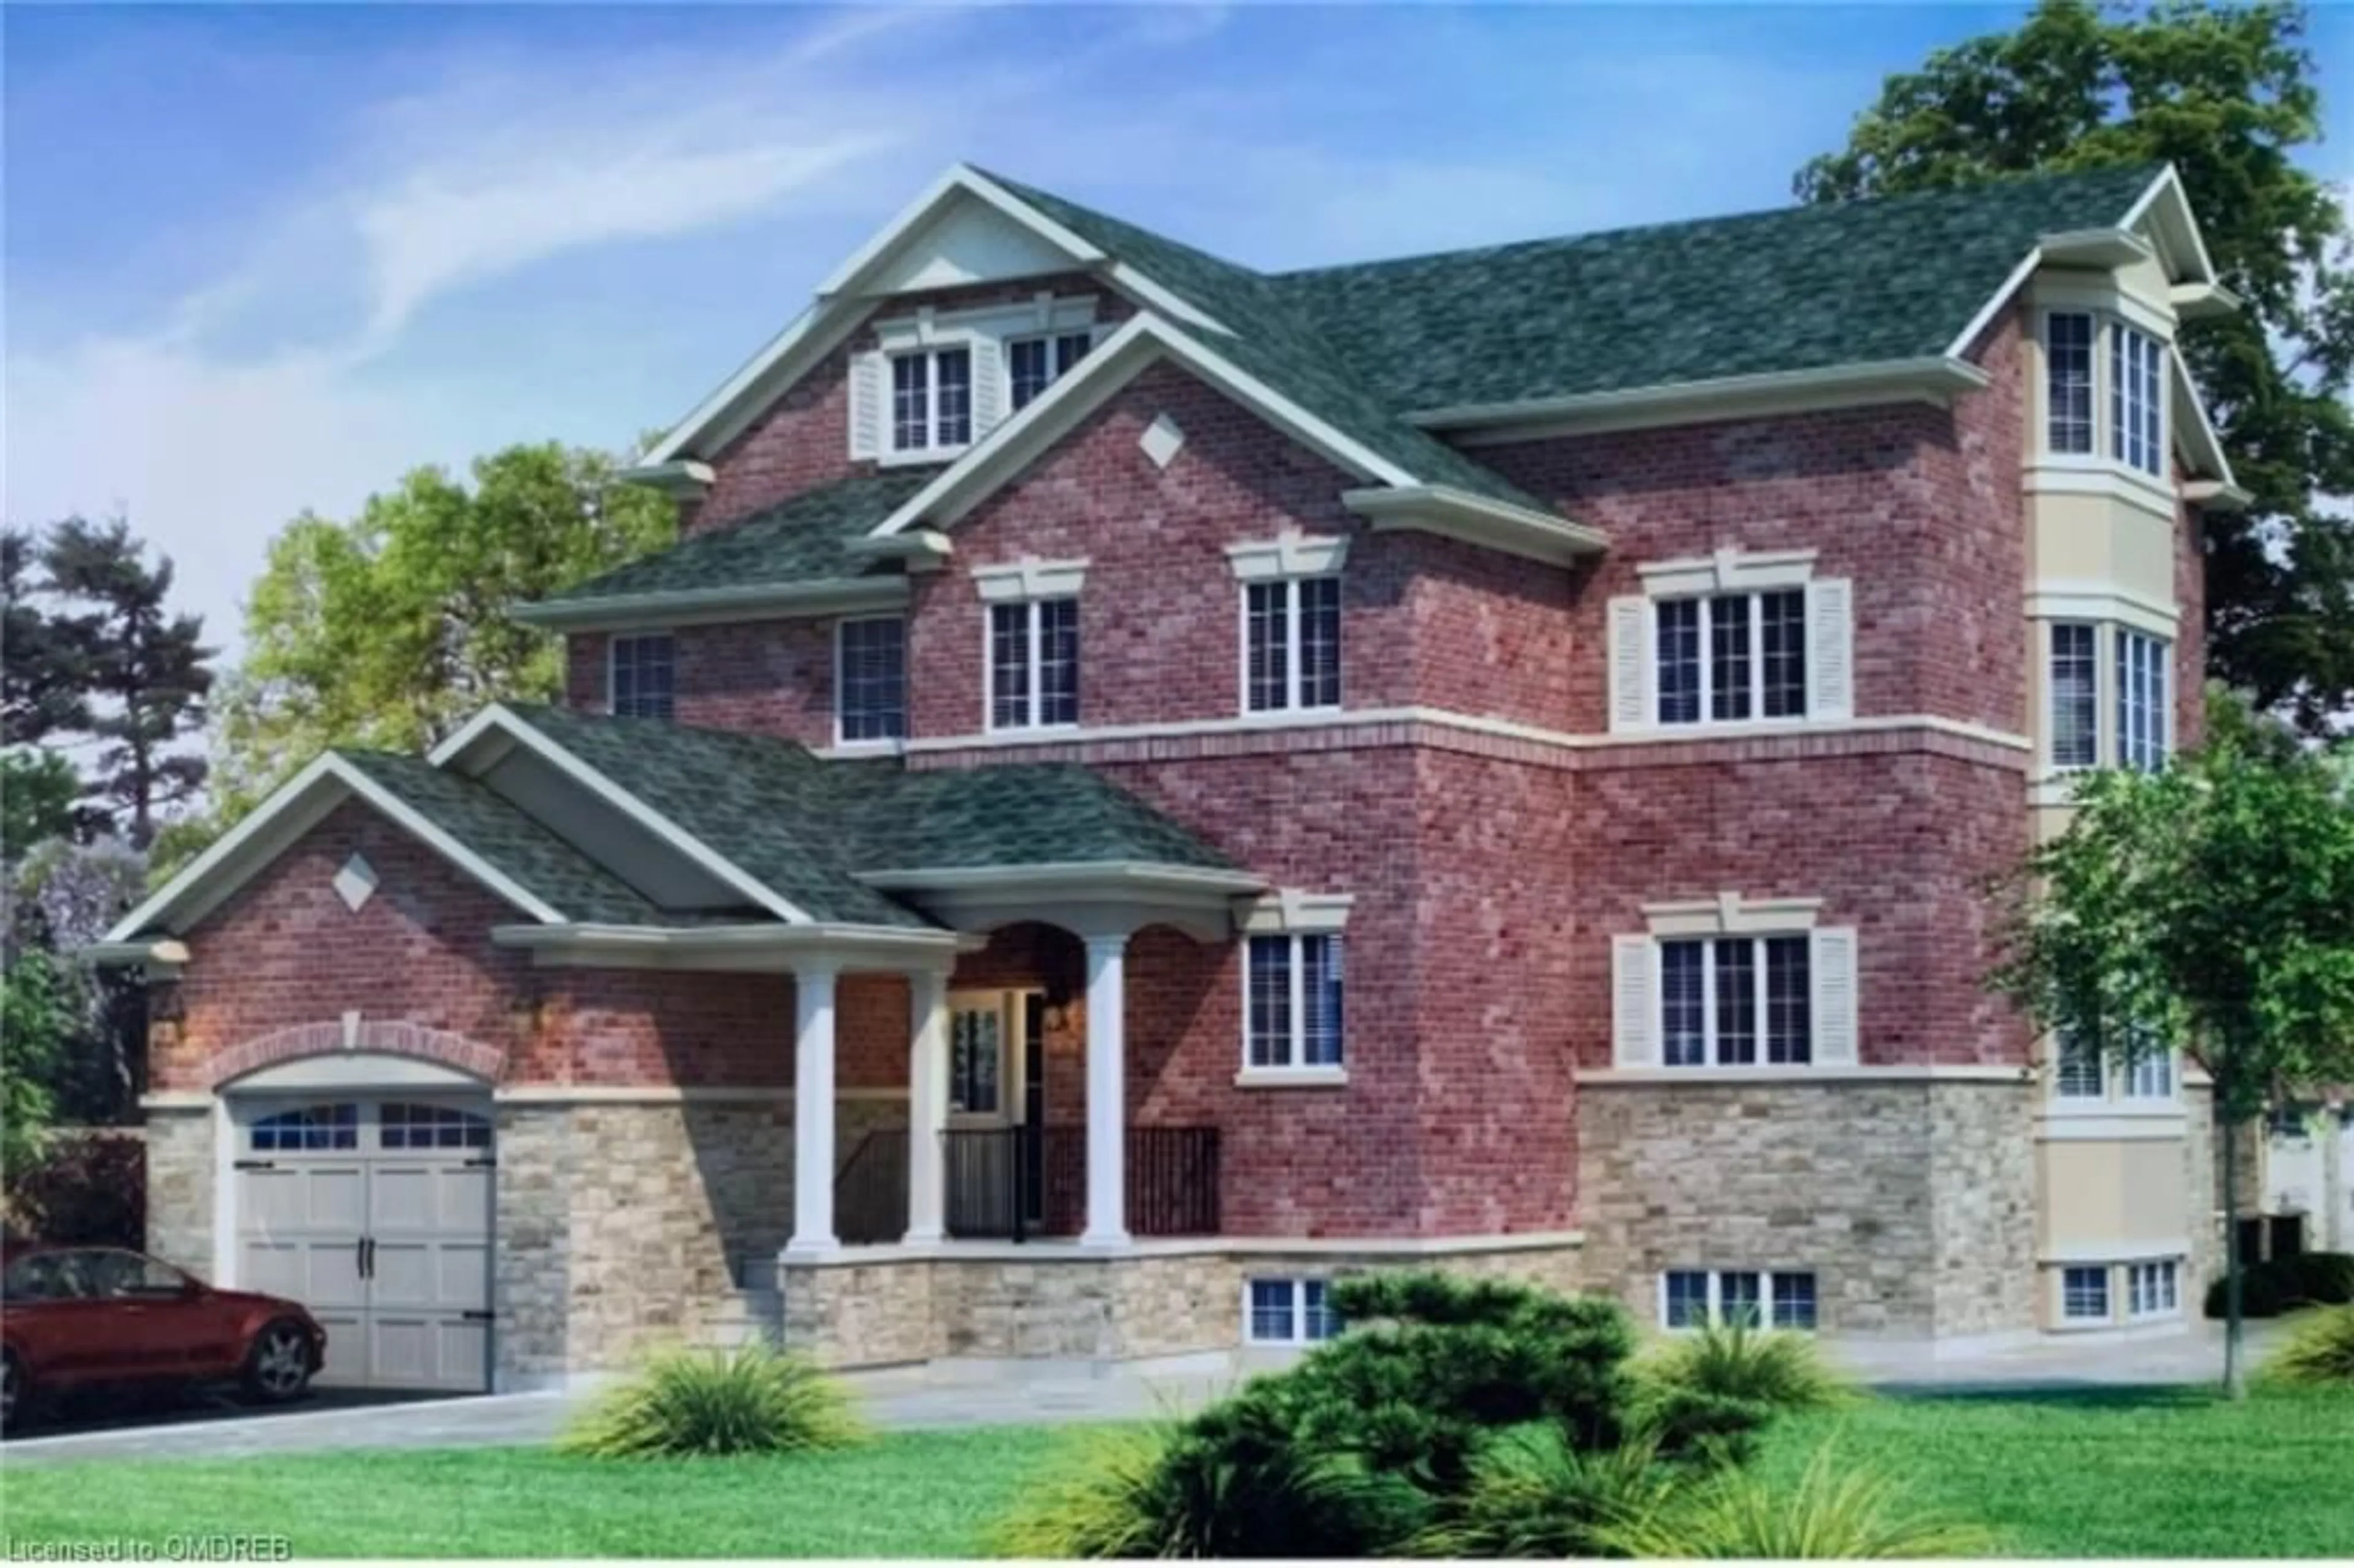 Home with brick exterior material for 74 Felker Ave, Stoney Creek Ontario L8G 2C5